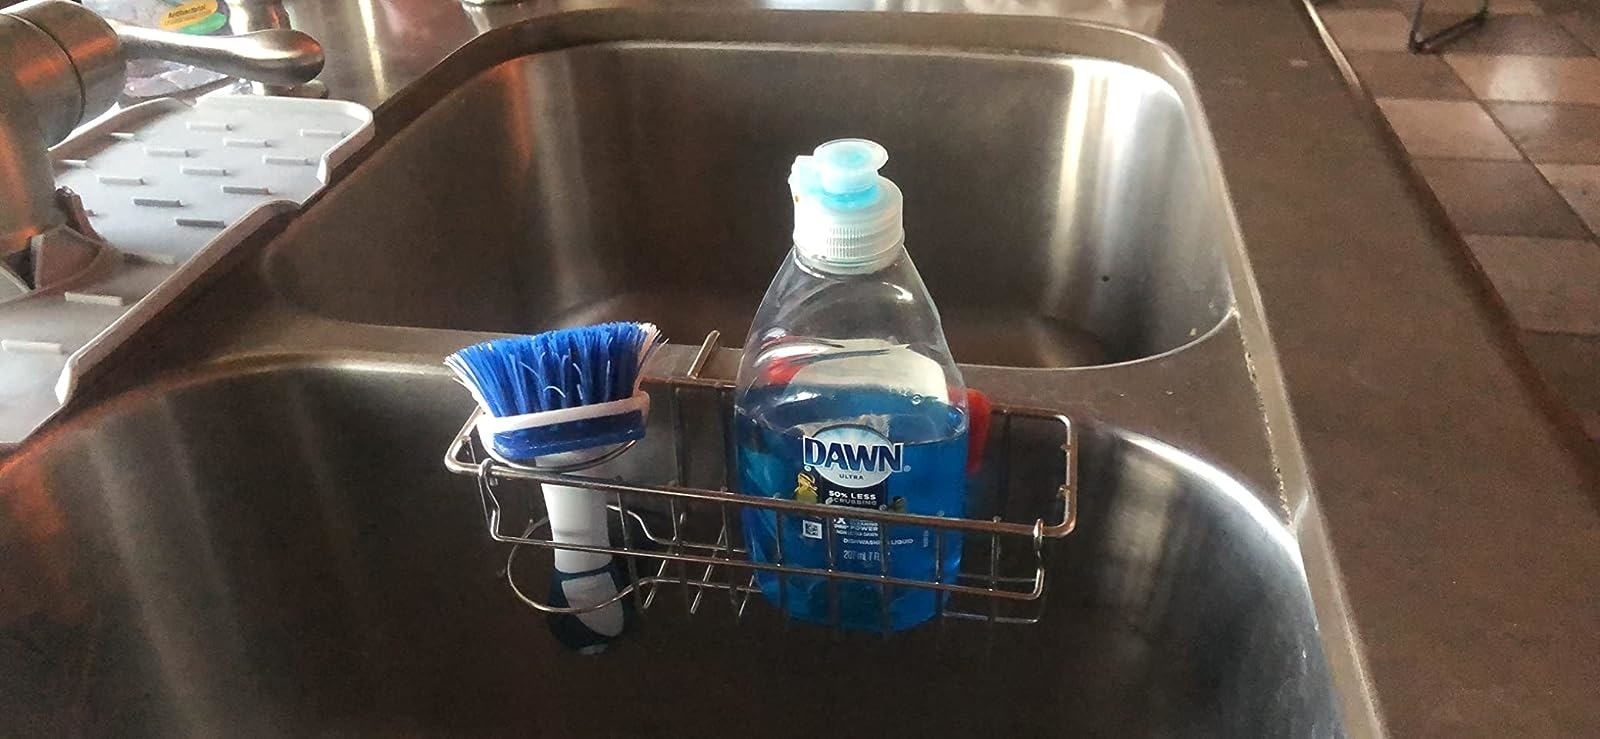 Reviewer image of a brush and dish soap bottle in holder over their sink